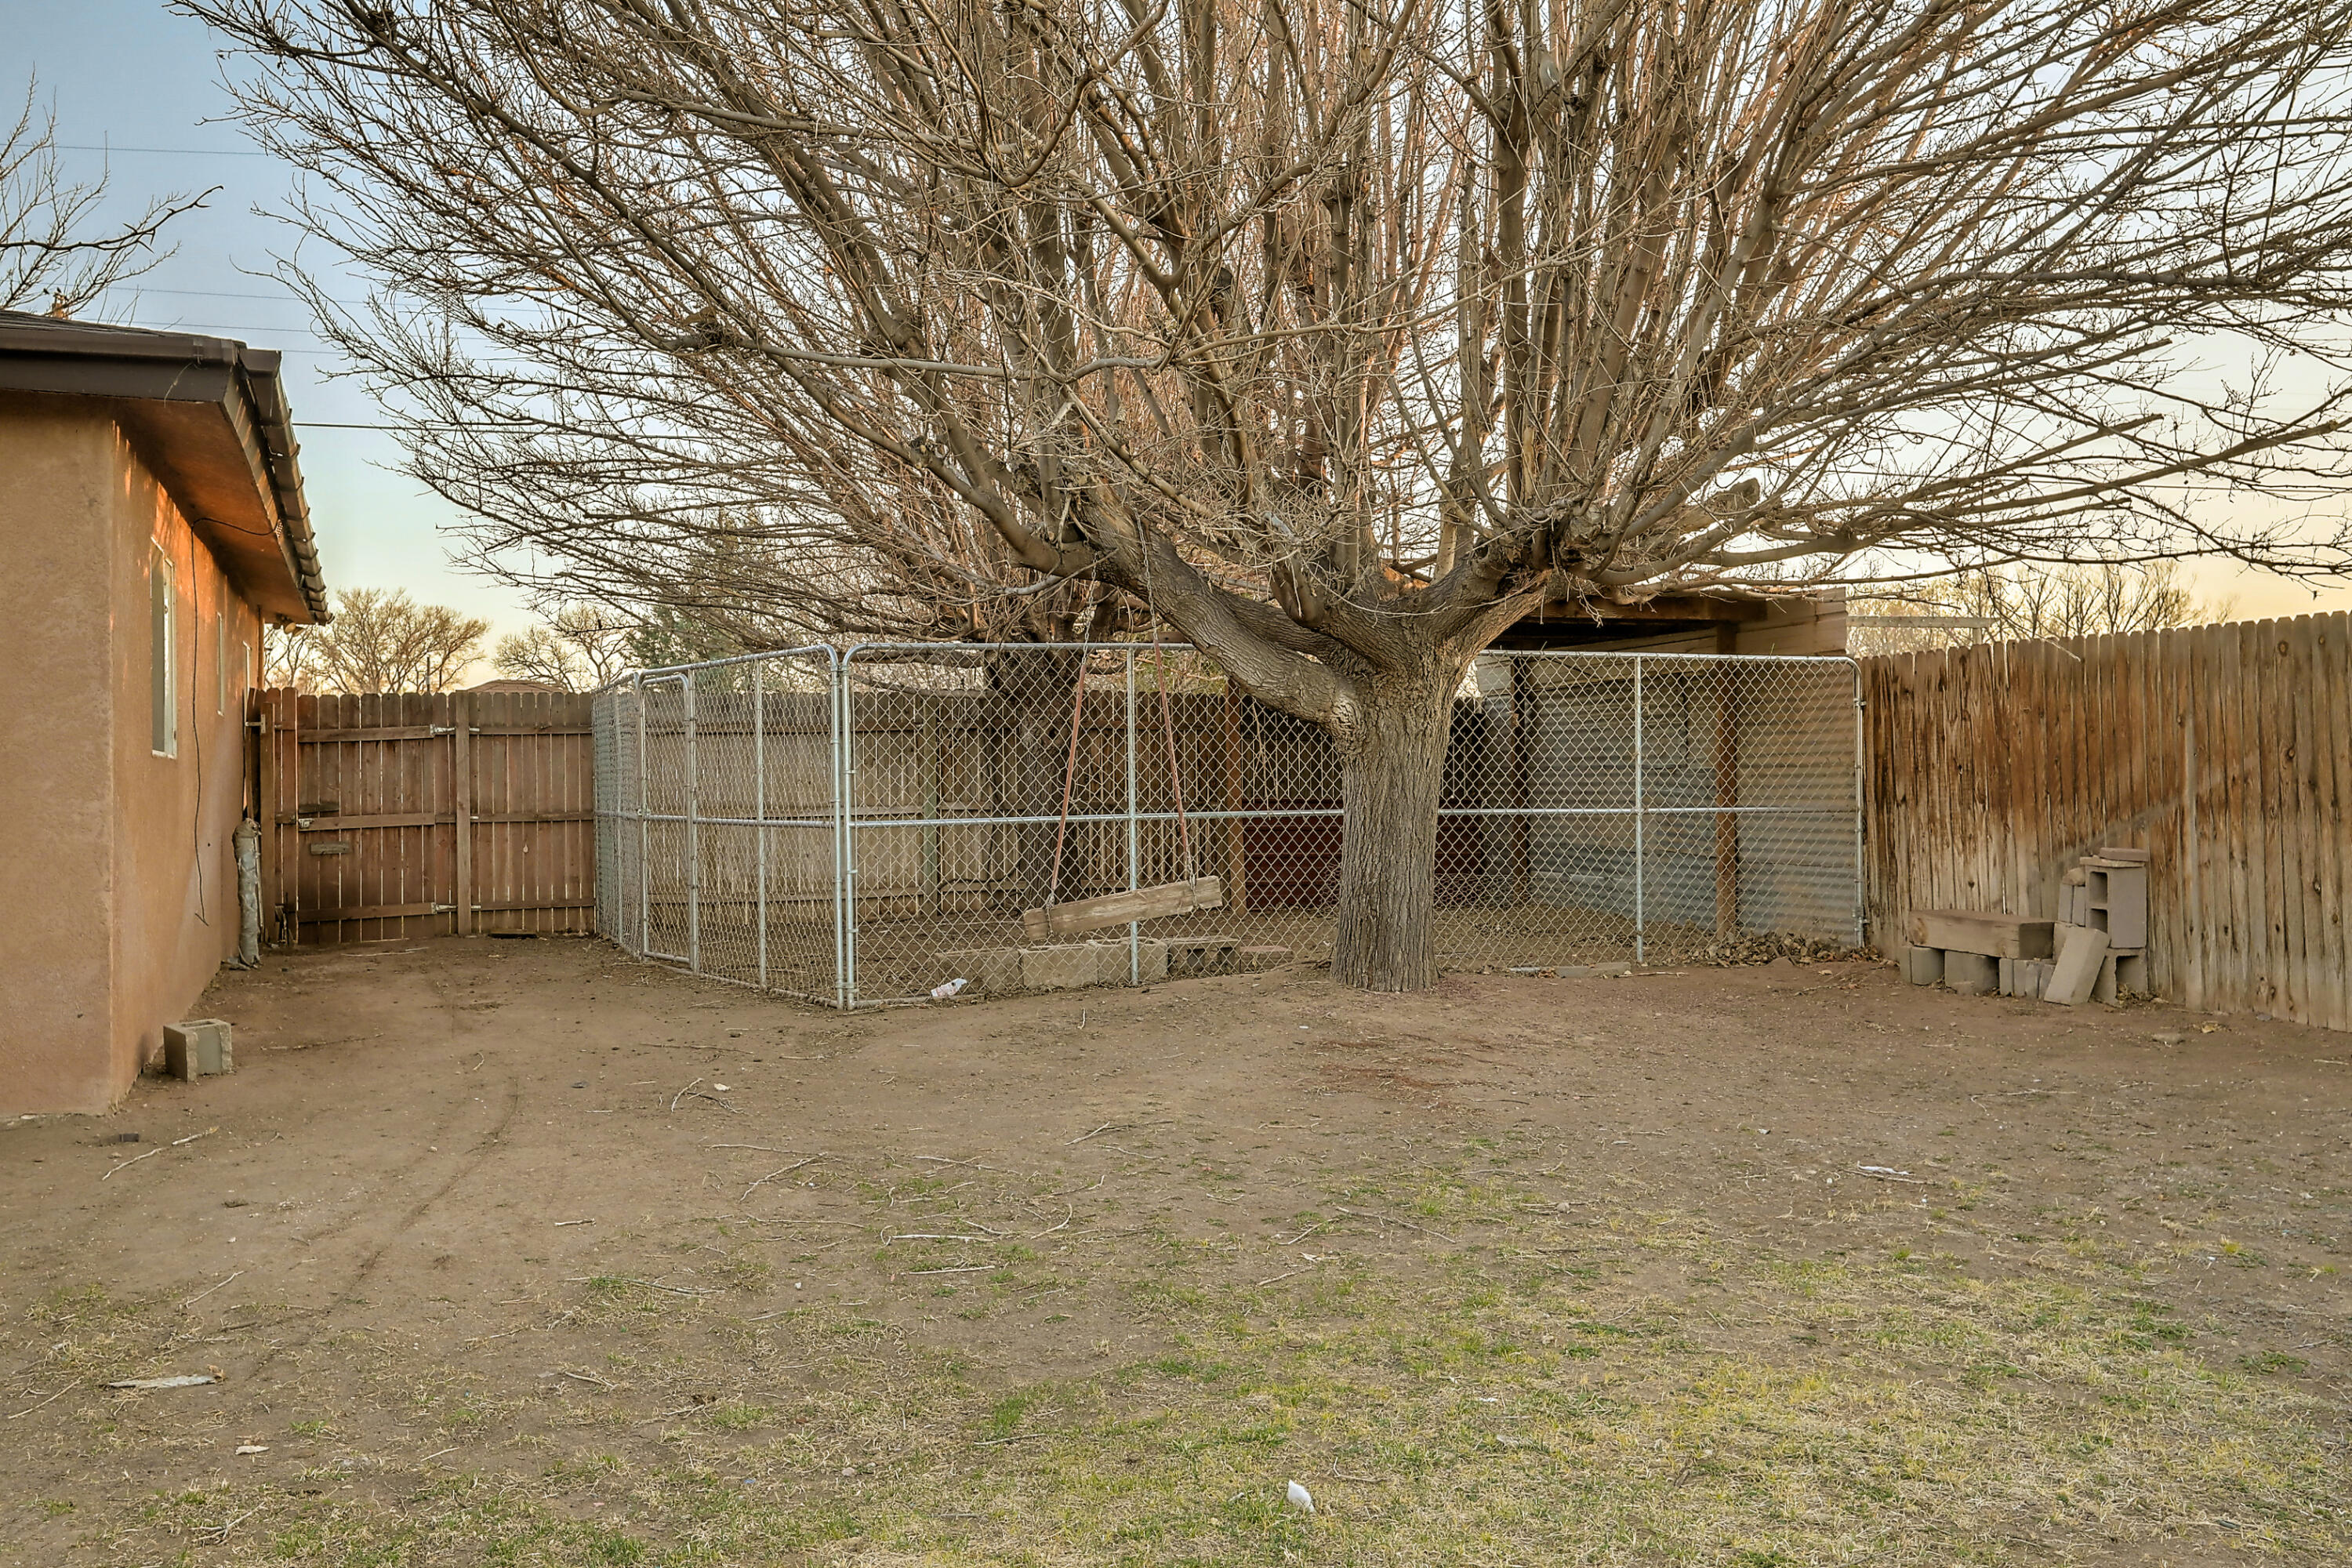 29 Don Jacobo Road, Peralta, New Mexico 87042, 3 Bedrooms Bedrooms, ,2 BathroomsBathrooms,Residential,For Sale,29 Don Jacobo Road,1059284